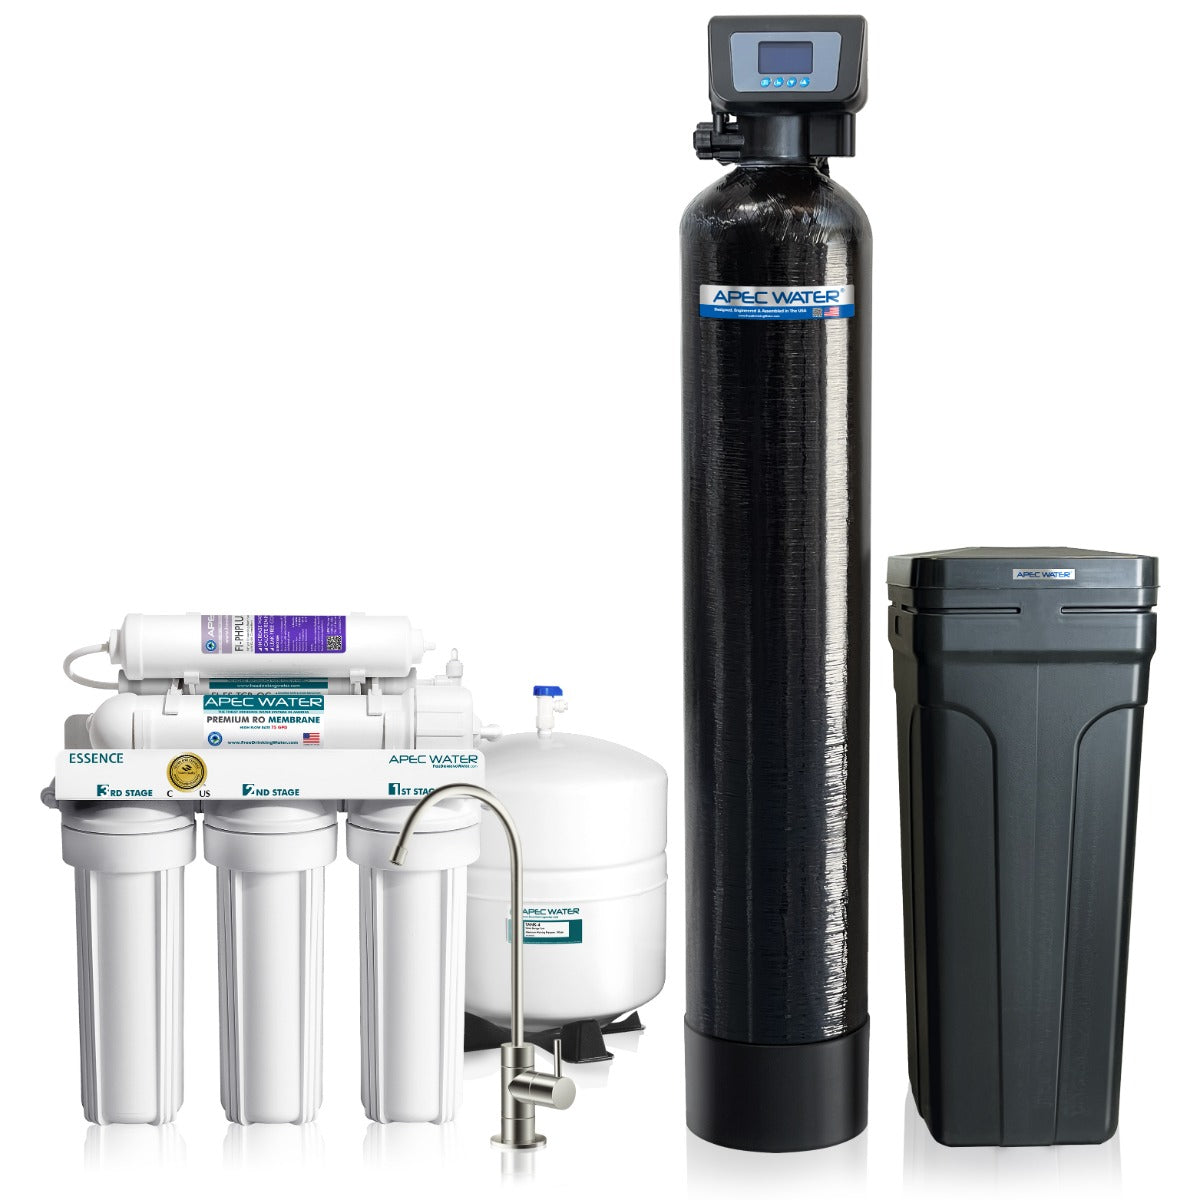 Hydro Express Water Softener 30 Plus Alkaline Mineral 6-Stage RO System Value Bundle